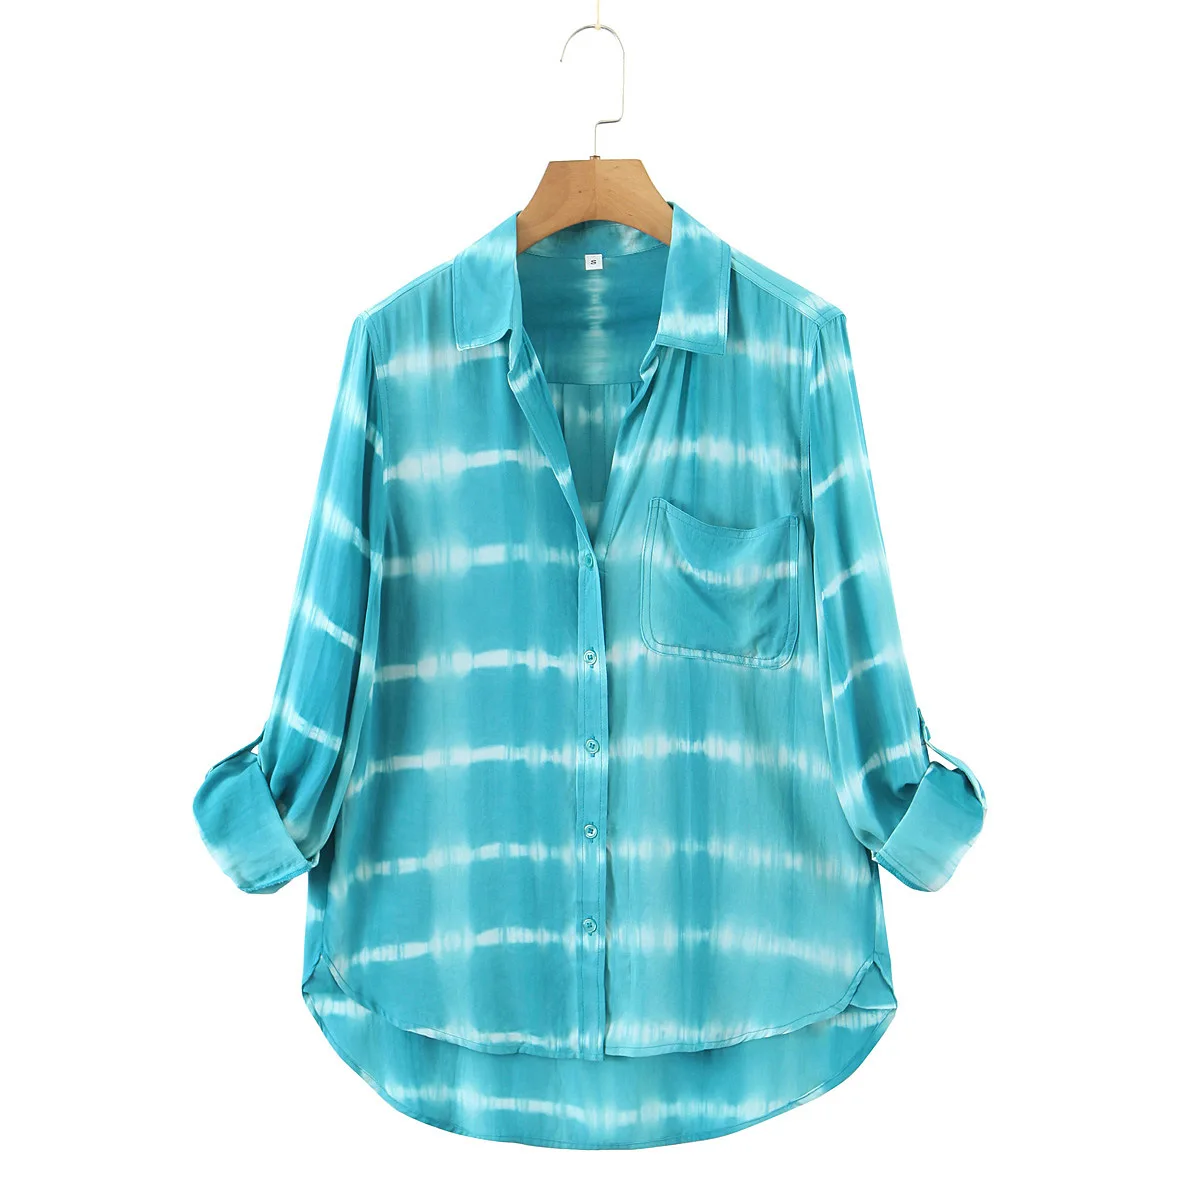 Bmissingyou Sky Blue Tie Dye Women Shirts Fold Over Cuffs with Pockets Yellow Single Breasted Casual Ladies Blouse Lapel